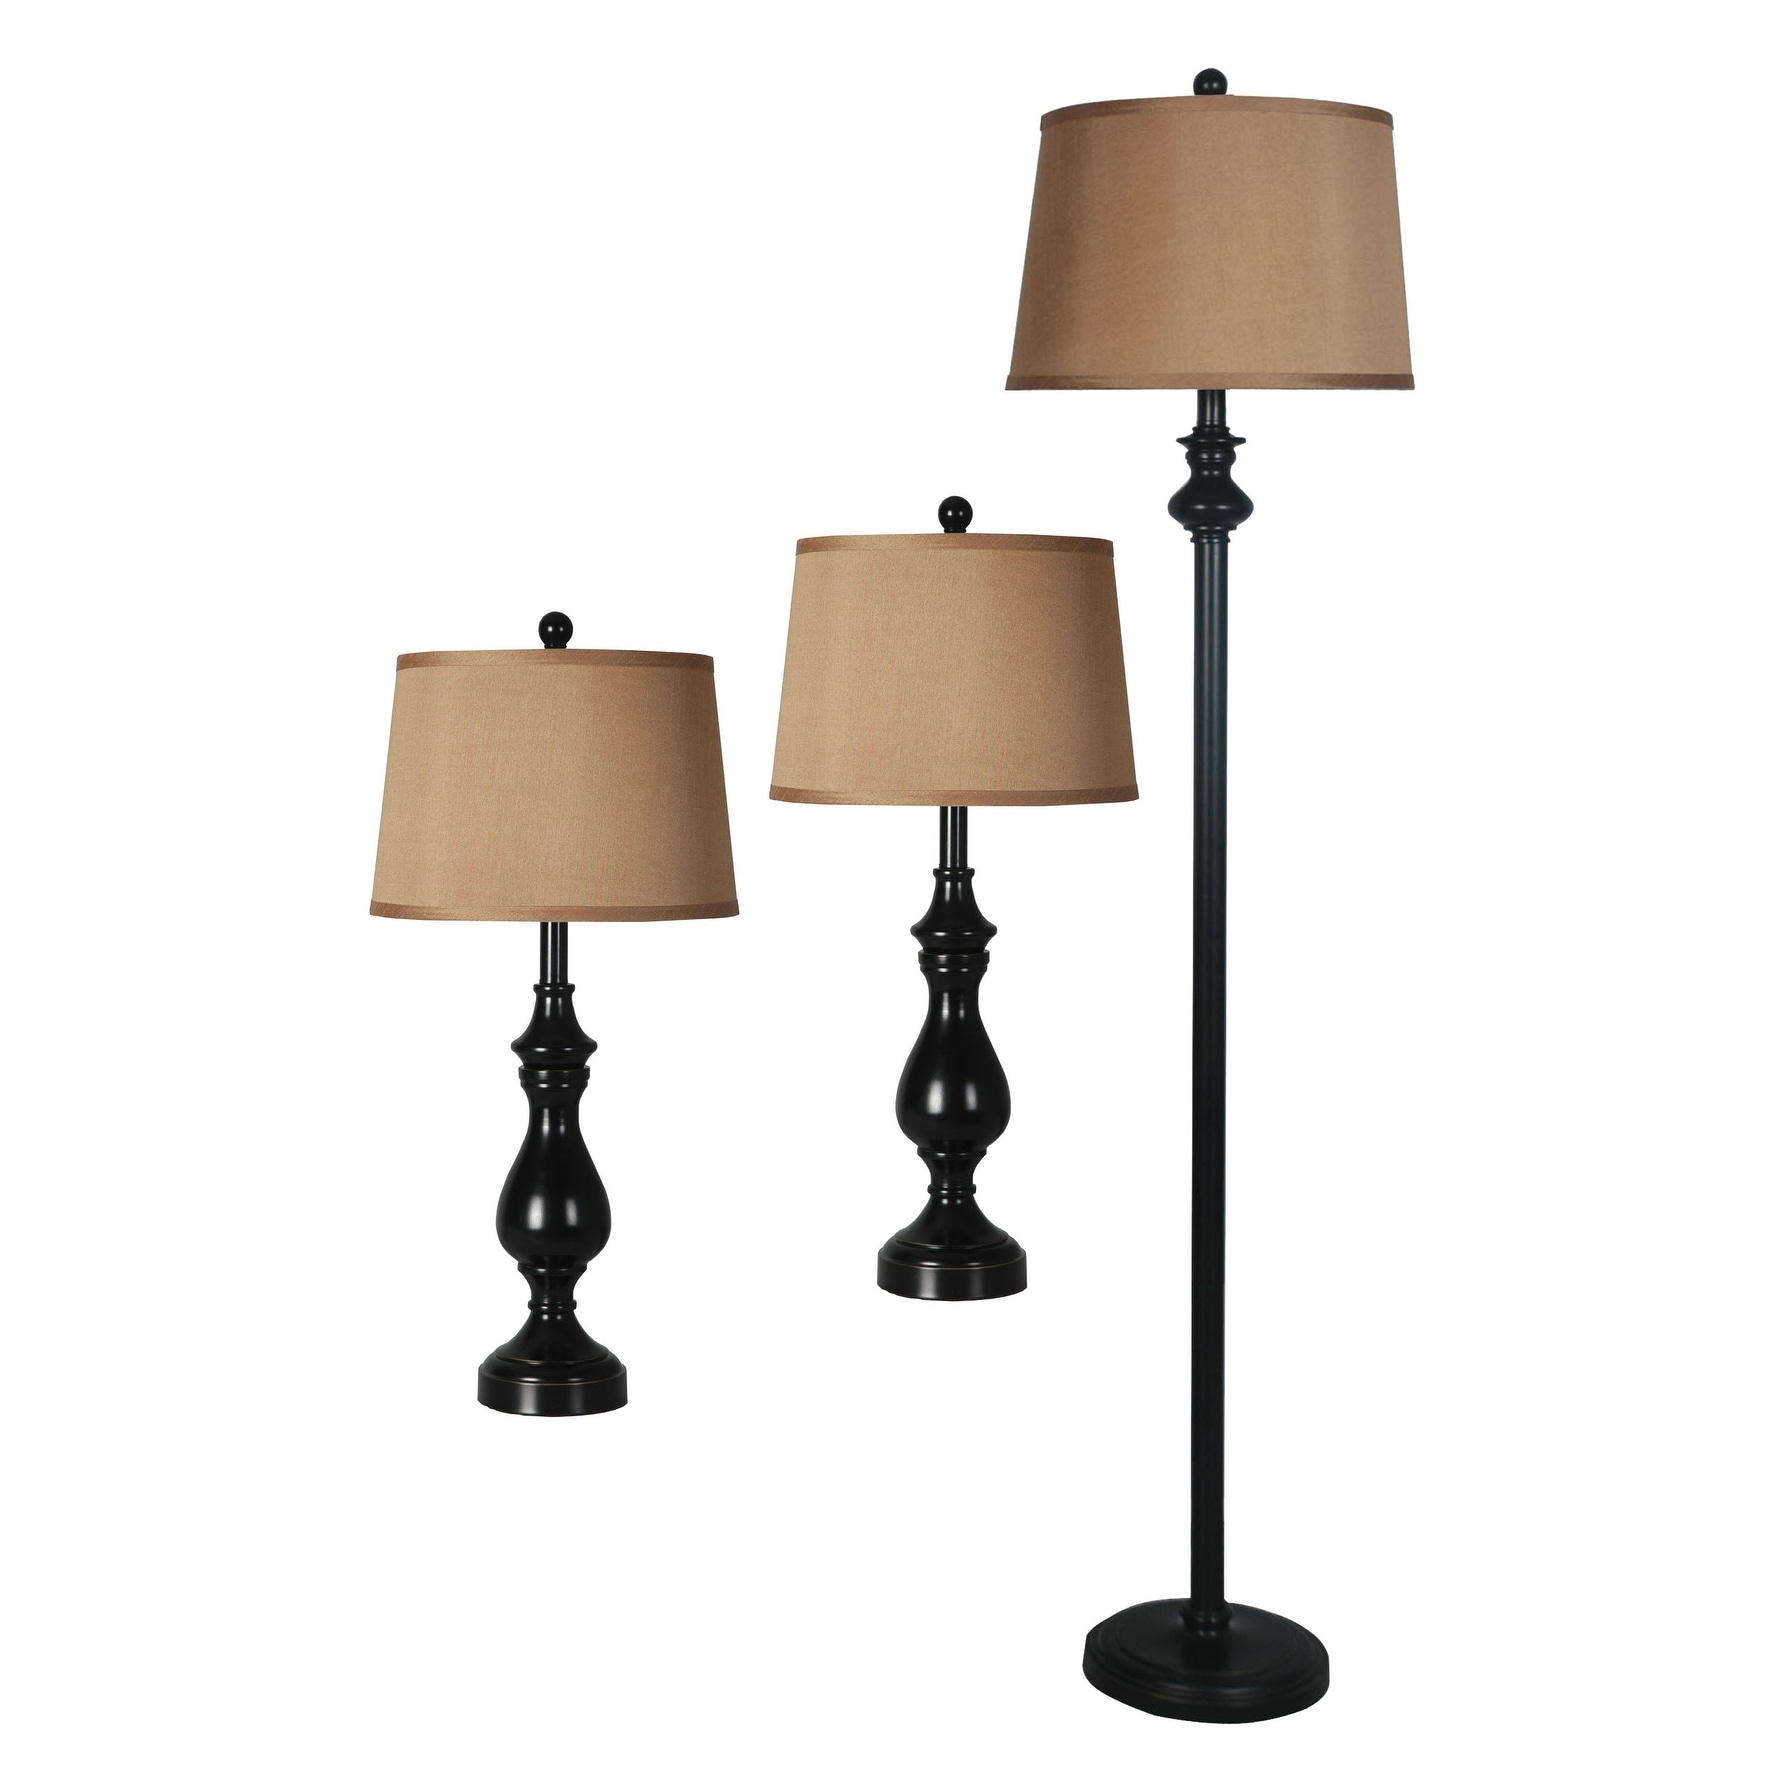 Silk Table Lamps - Bed Bath & Beyond